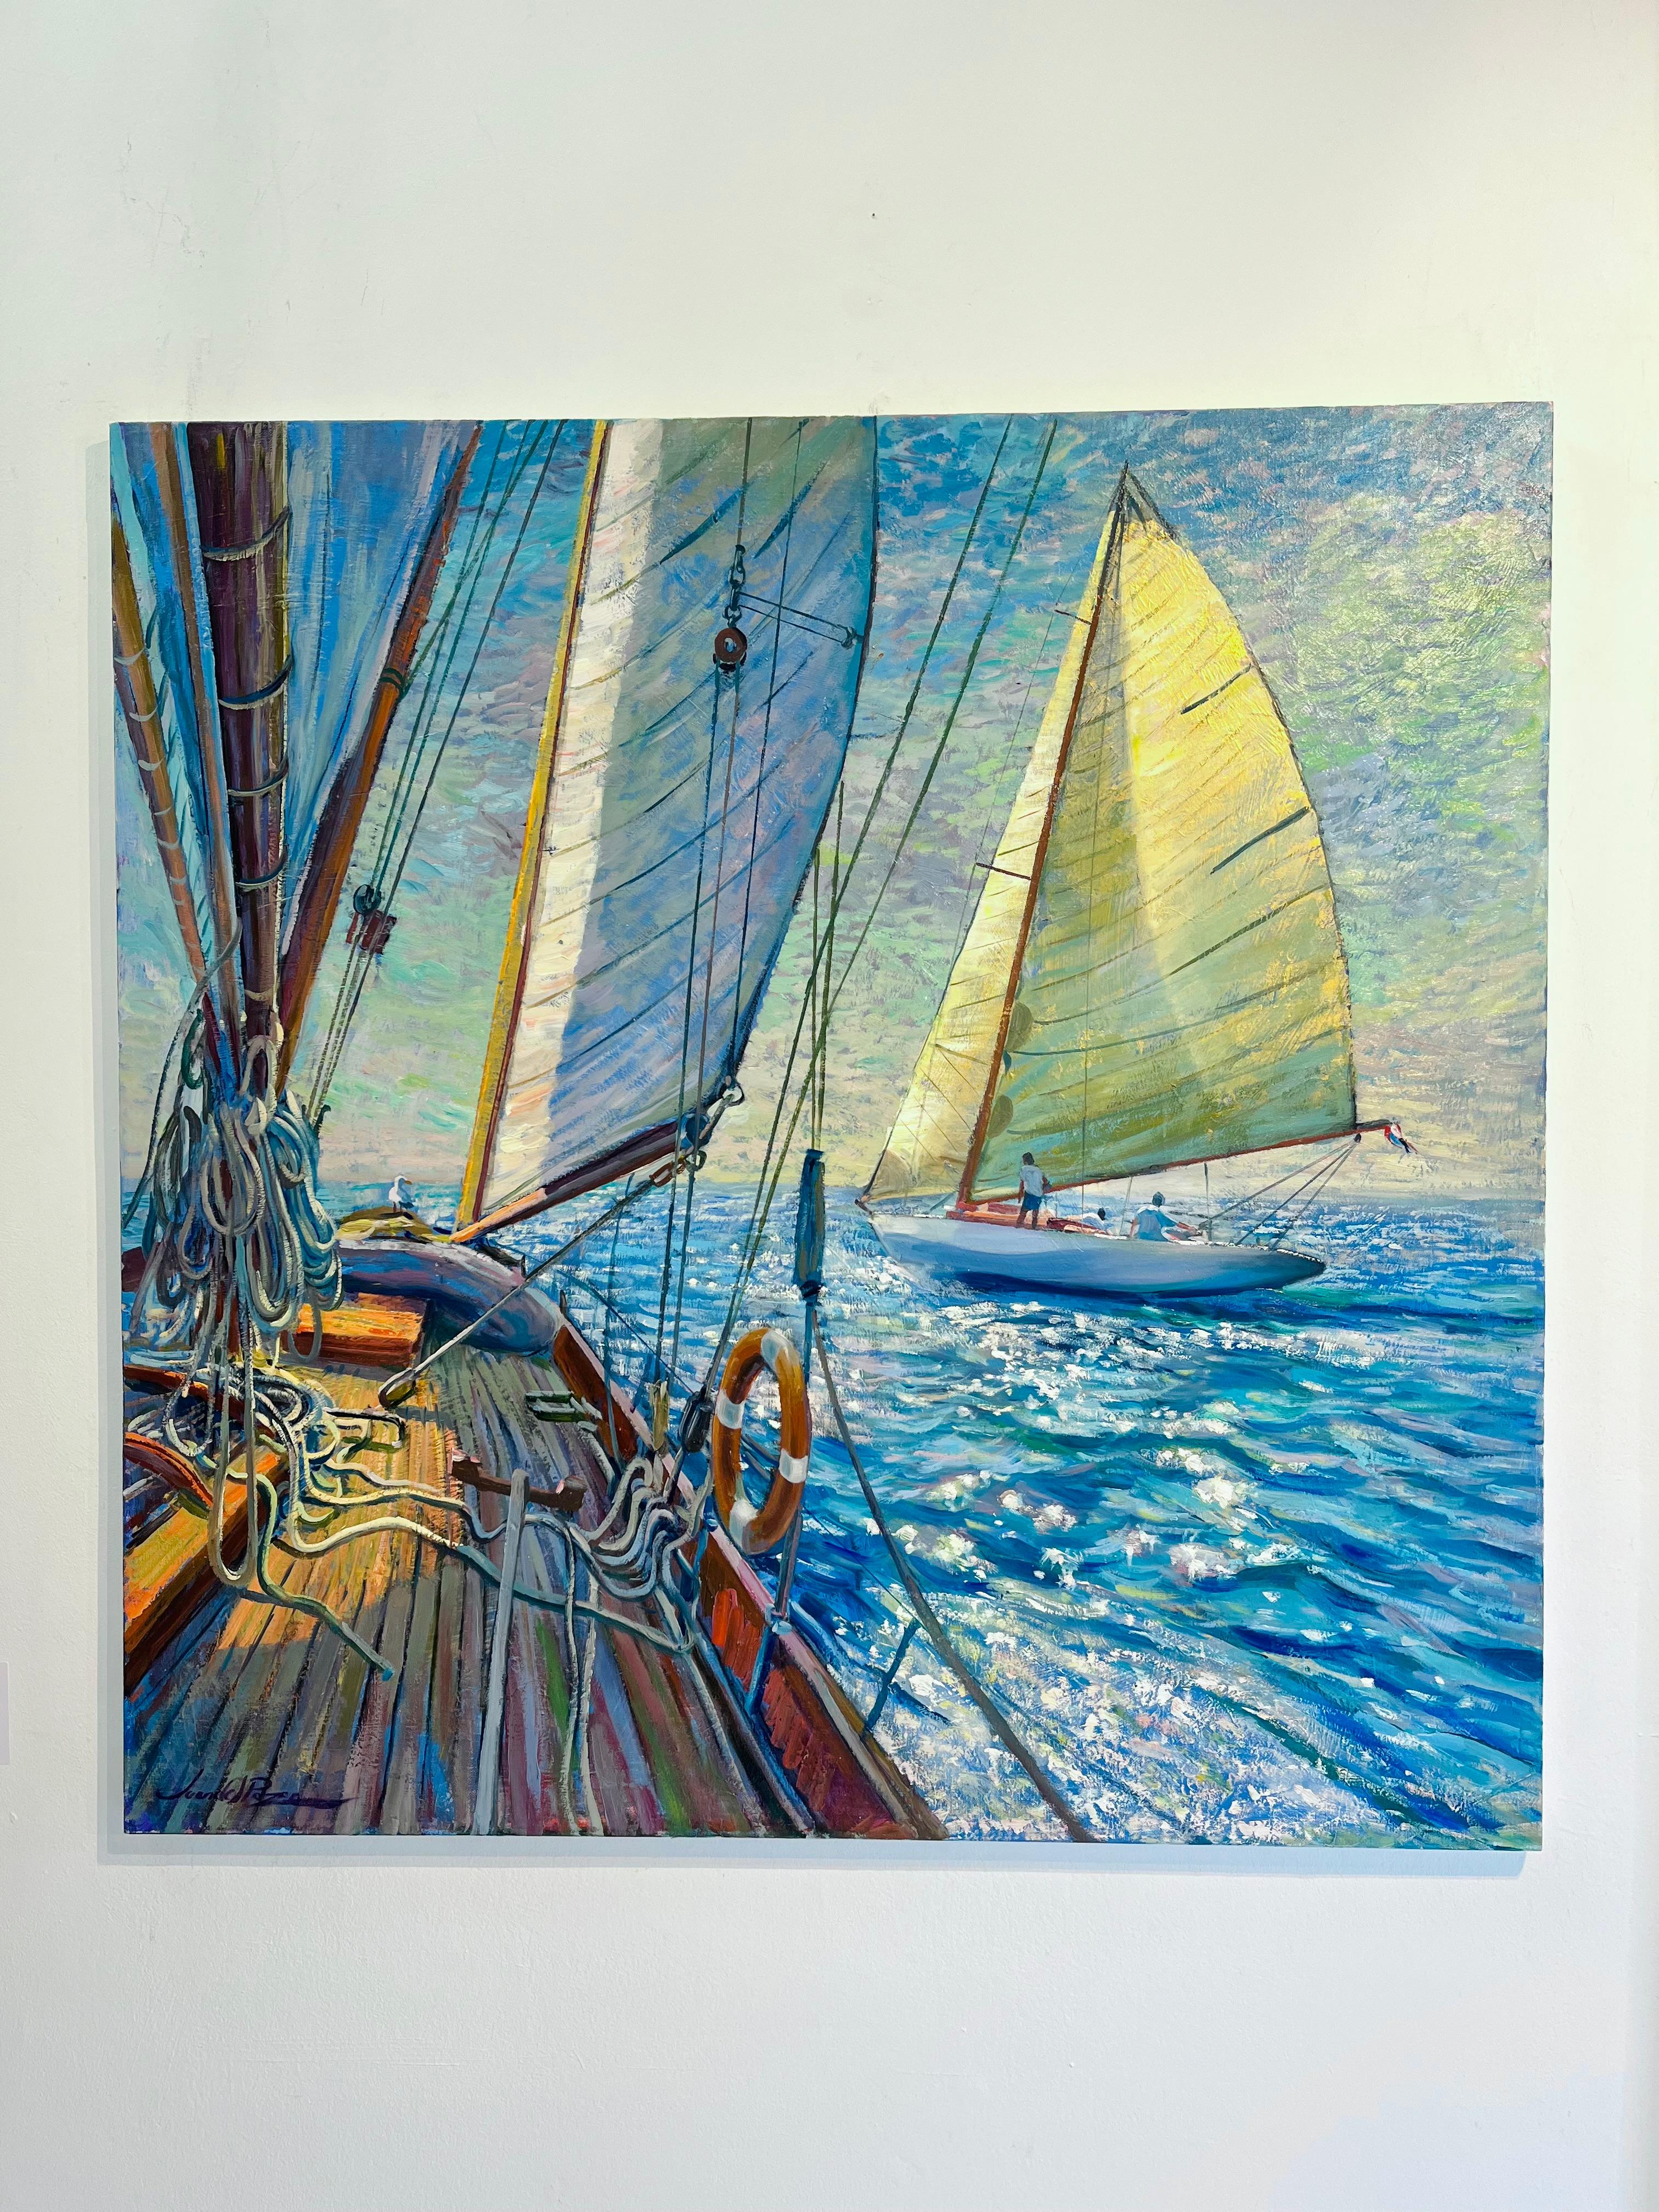 Shining Sea-original impressionism seascape sail oil painting- contemporary art - Painting by Juan del Pozo